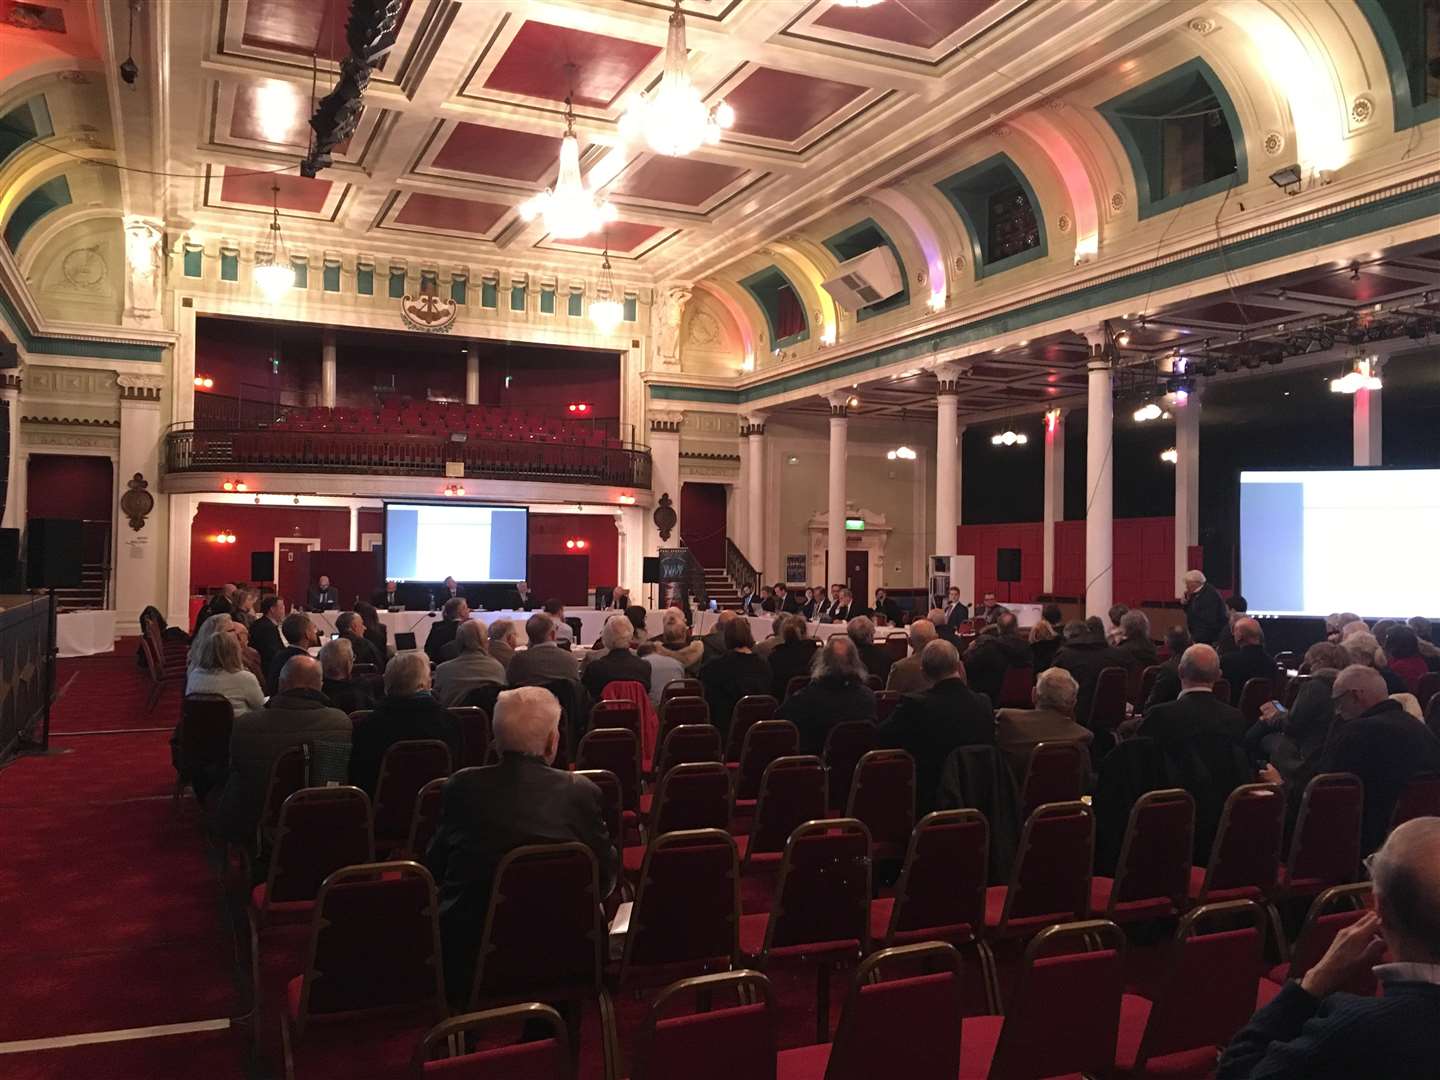 Around 150 people attended the outline hearing setting out the future of Manston Airport as planning inspectors begin their examination of an application for compulsory purchase powers to reopen the site as a freight airport. Margate Winter Gardens (6427295)